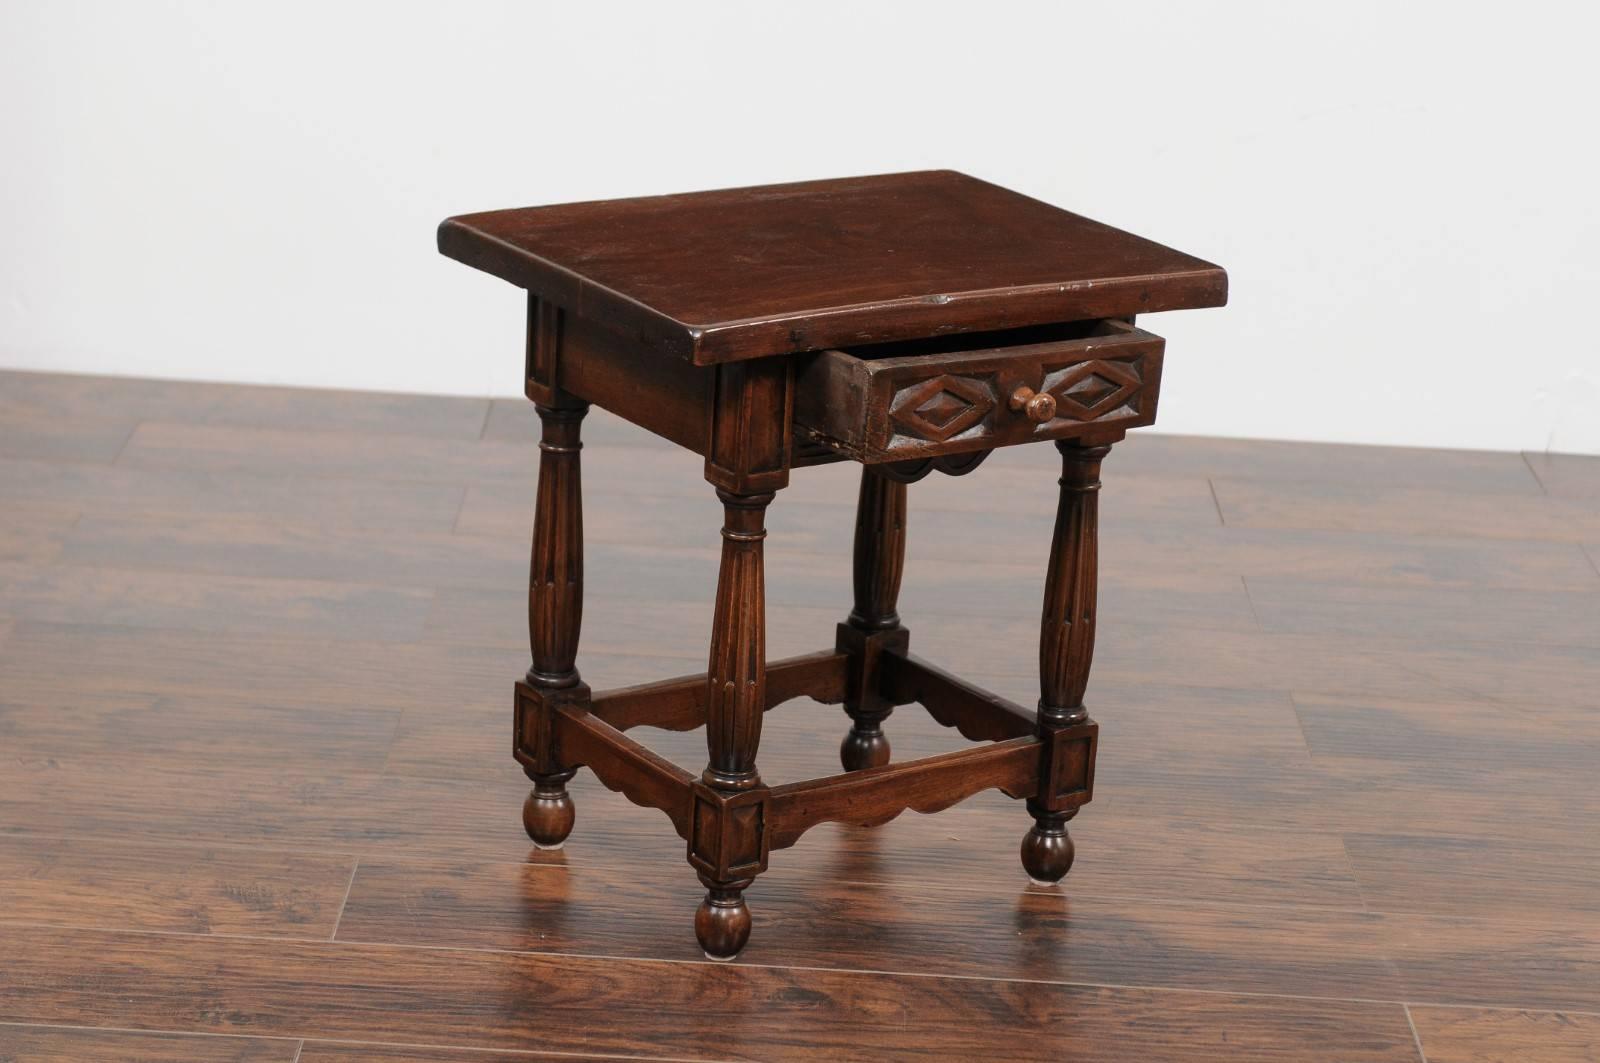 Petite Italian Walnut Side Table with Single Drawer and Fluted Legs, circa 1870 In Good Condition For Sale In Atlanta, GA